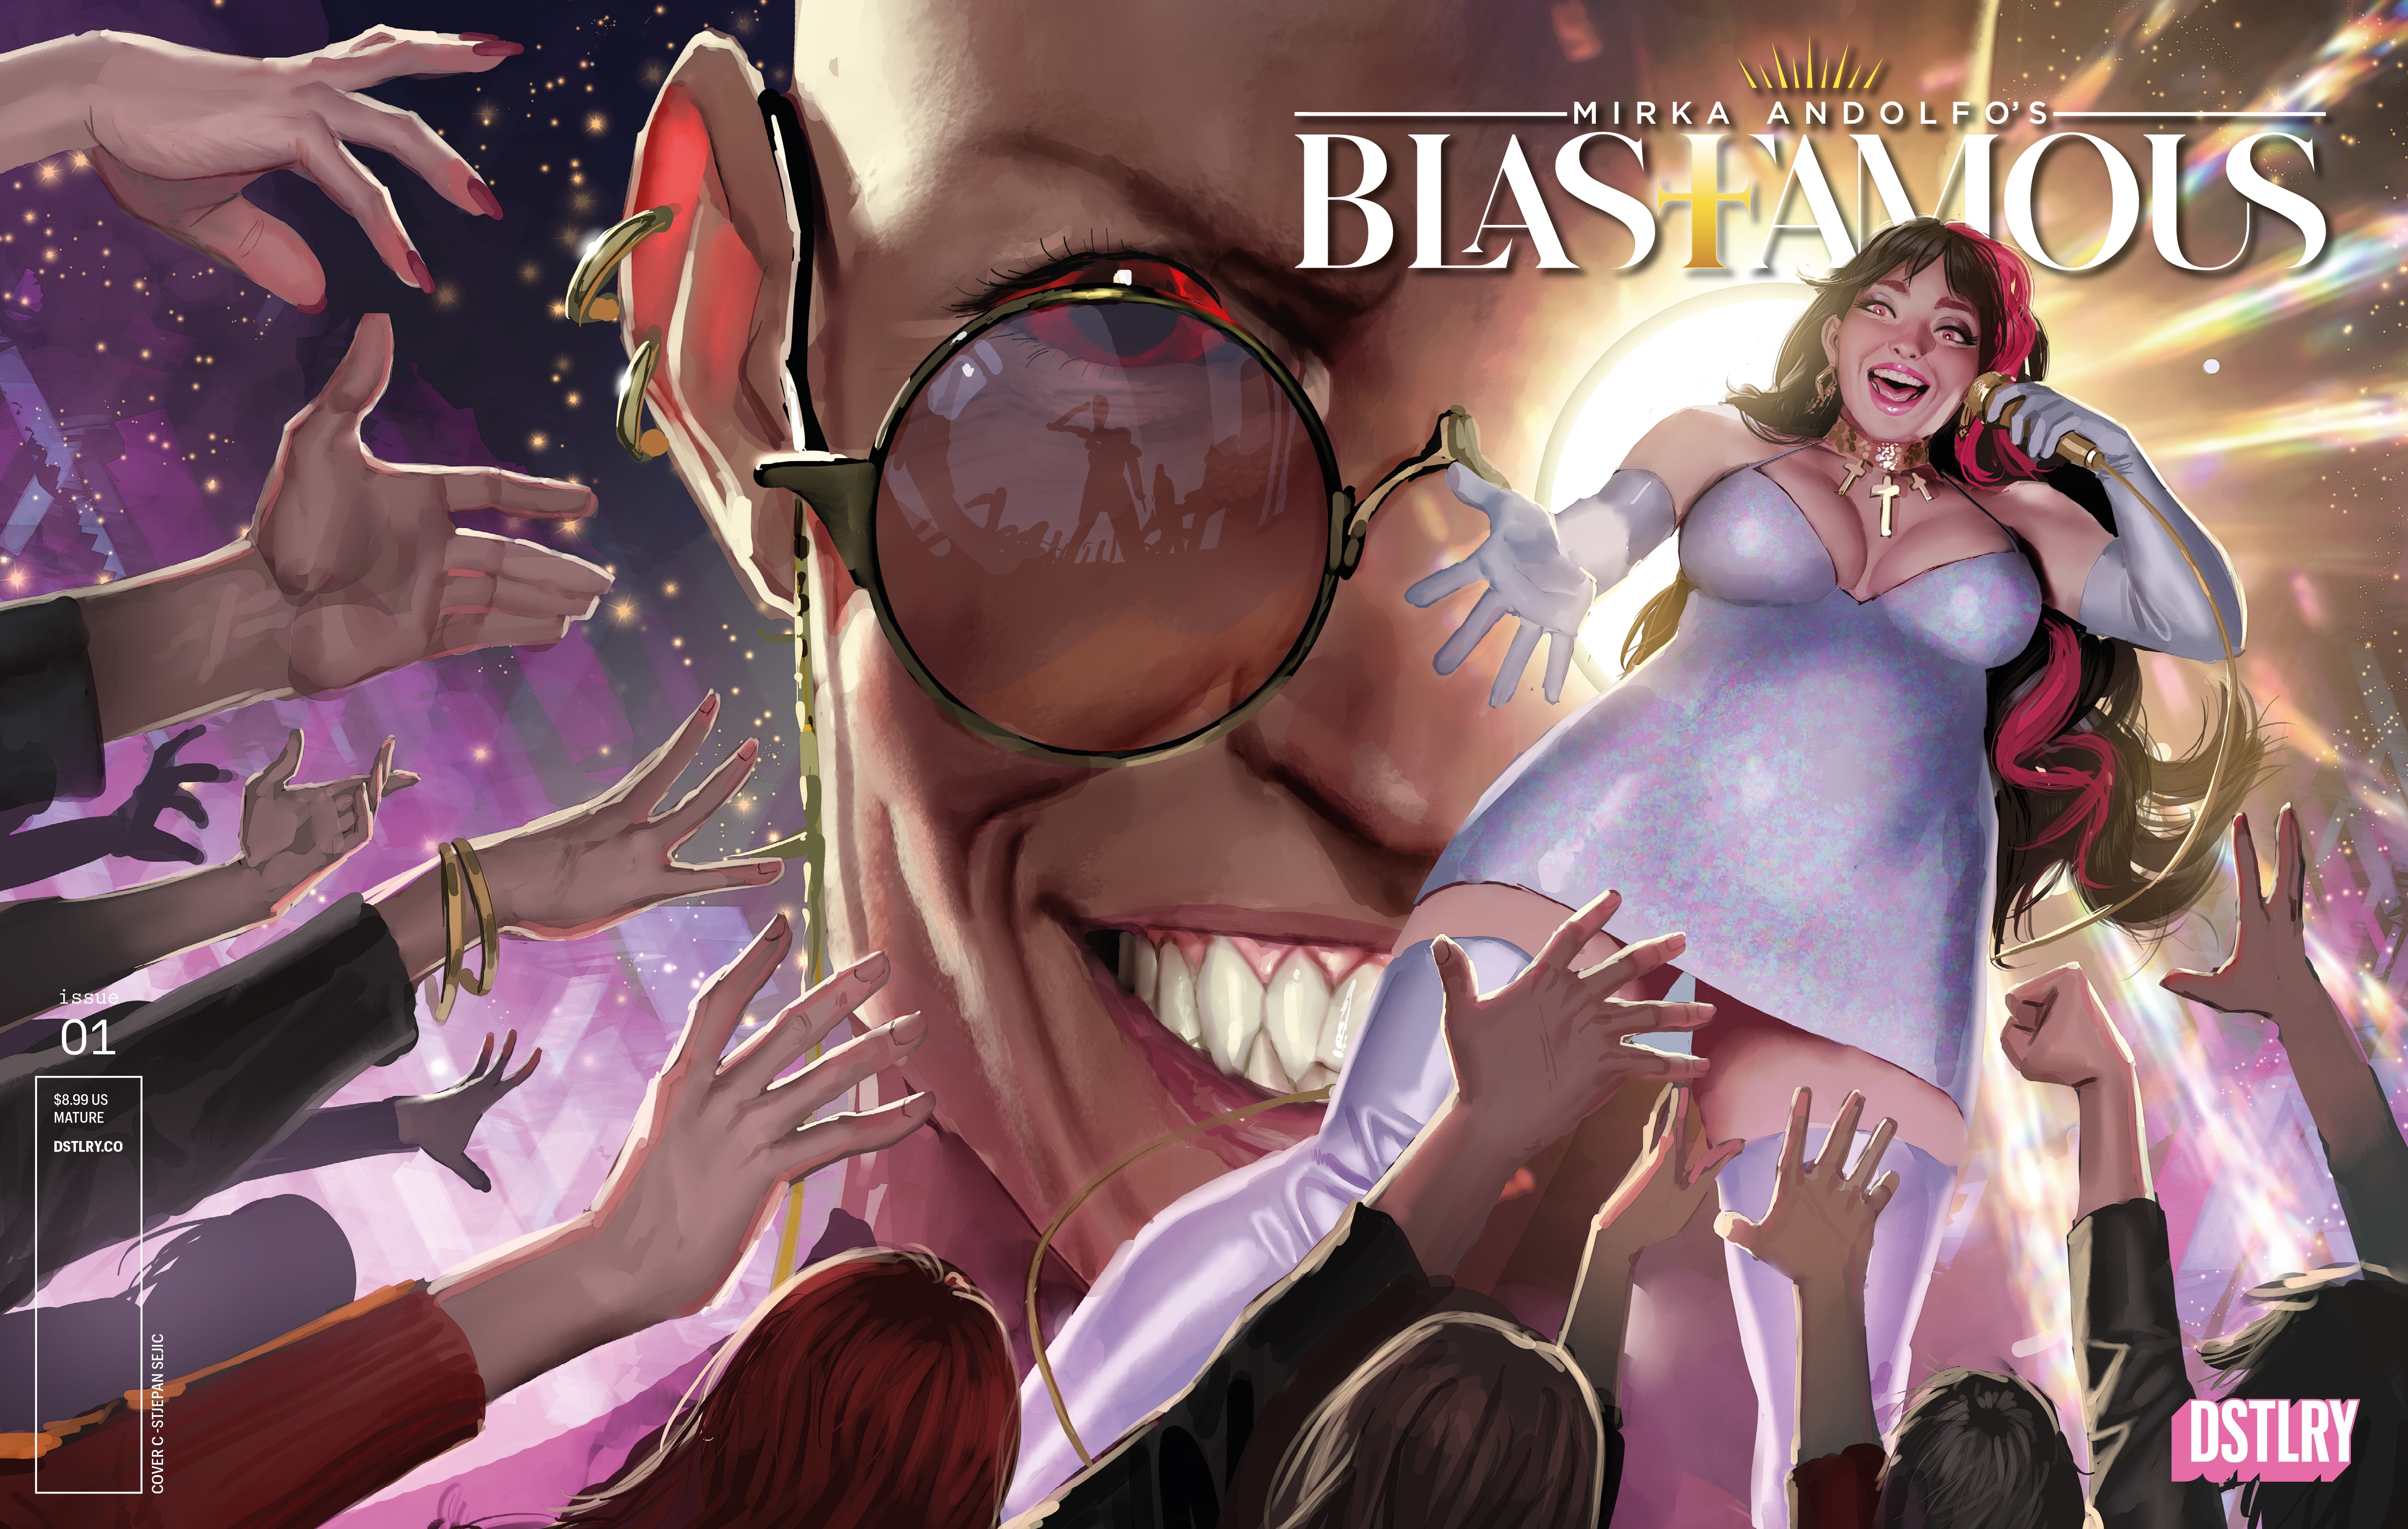 Blasfamous #1 Cover C Variant 1 For 10 Incentive (Of 3)